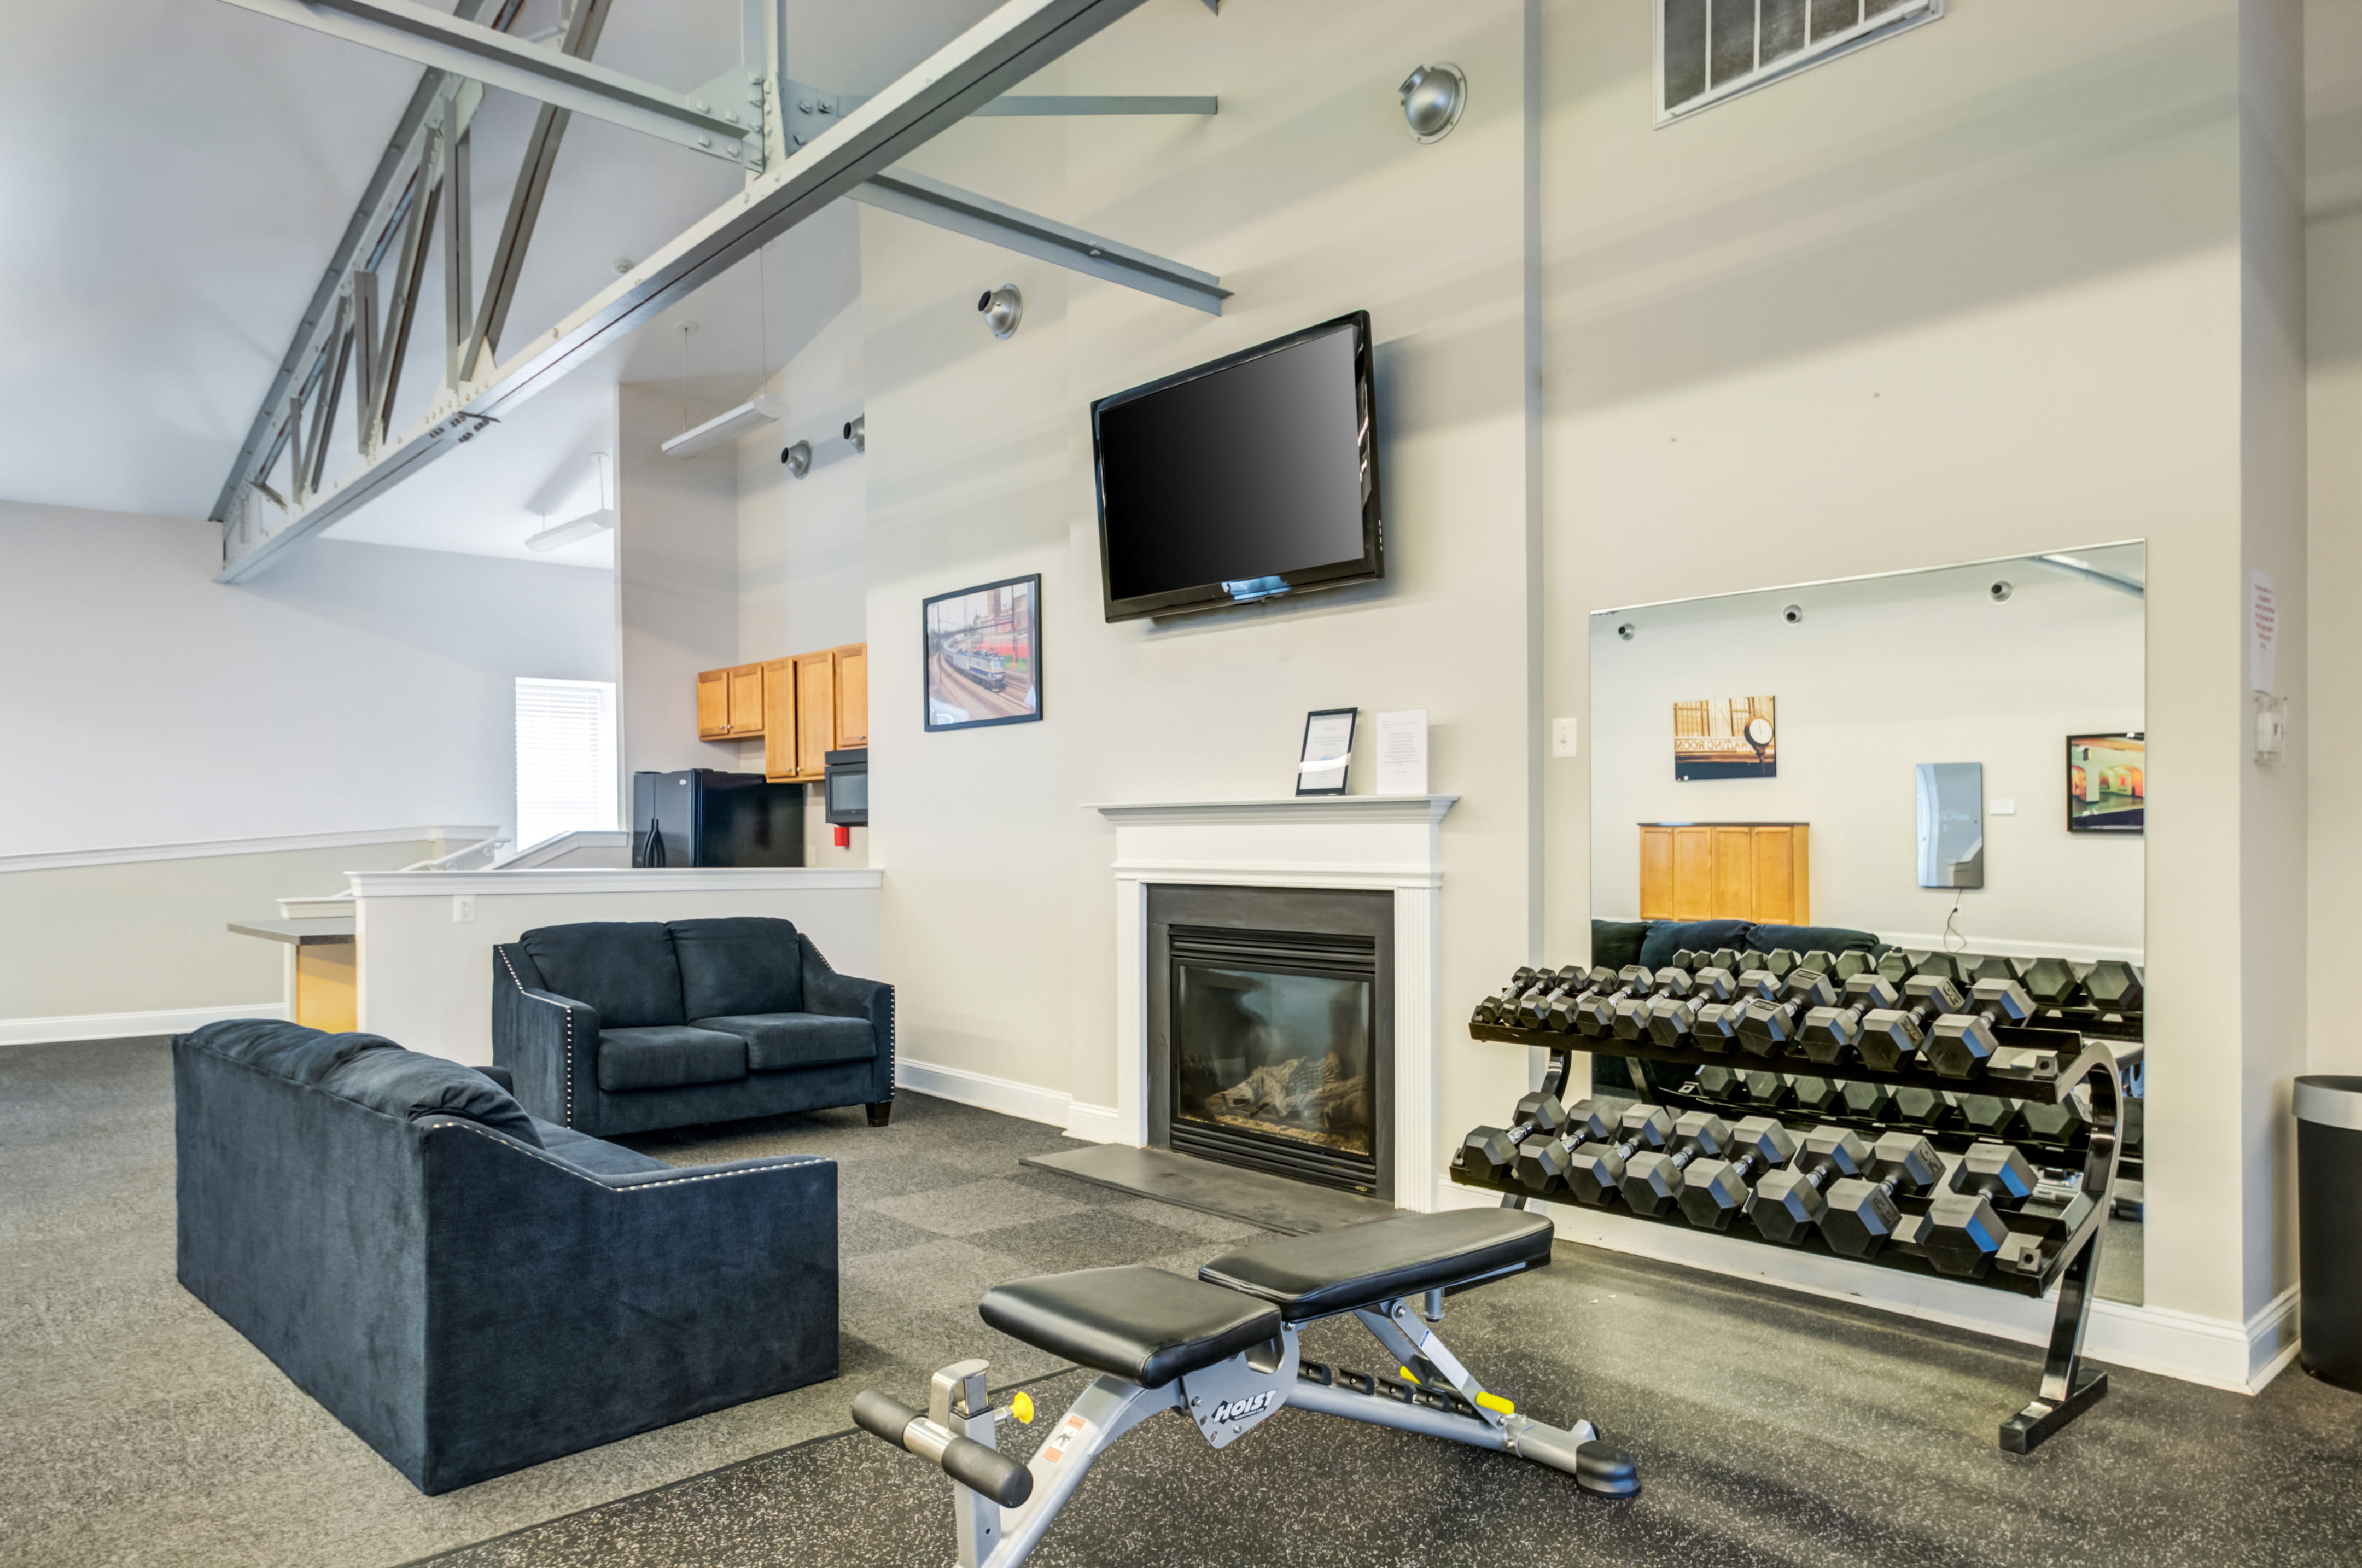 Community activity room at Melrose Station Apartments in Elkins Park, Pennsylvania